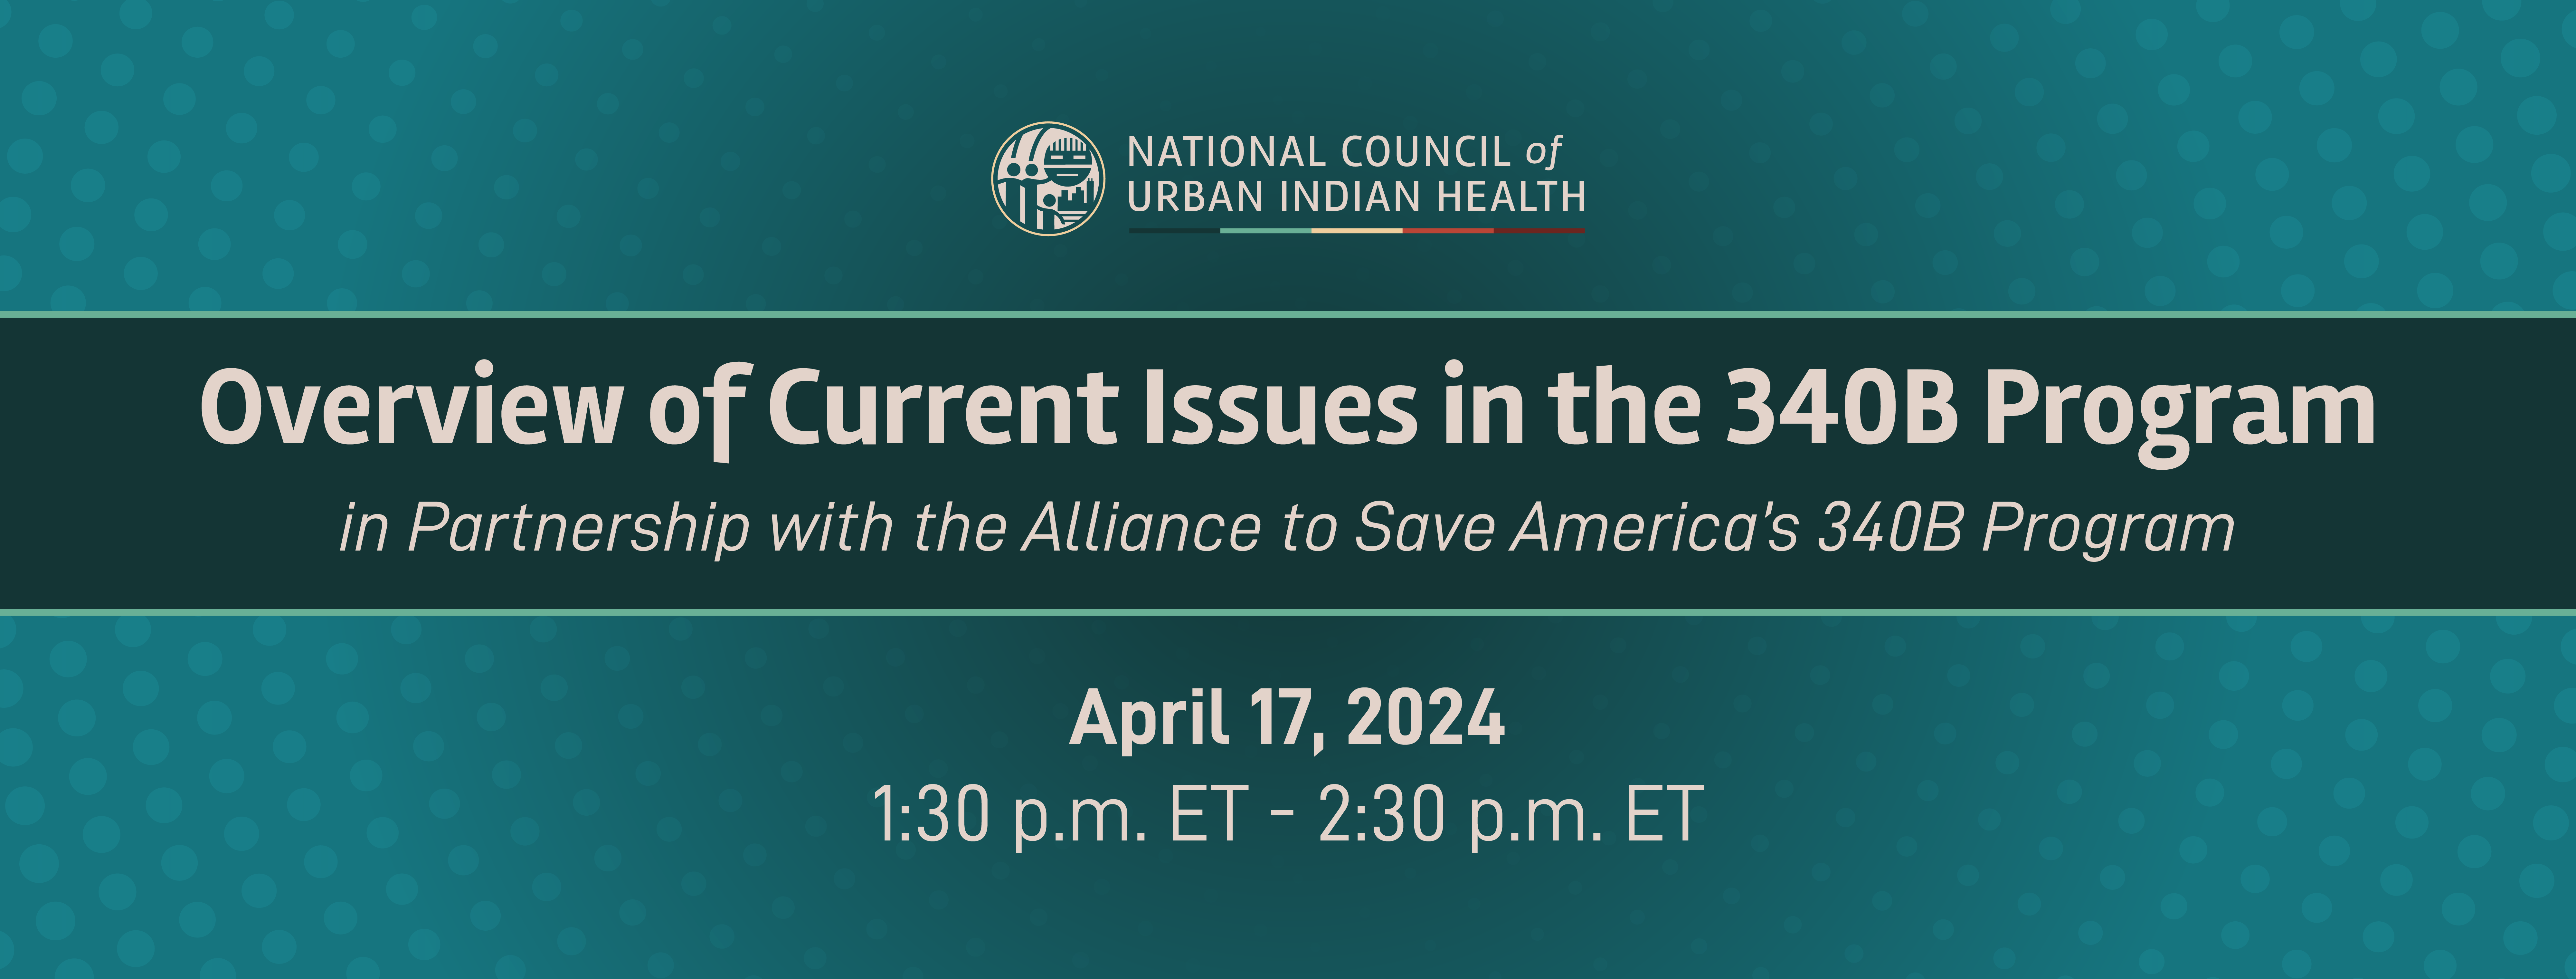 Overview of Current Issues in the 340B Program in Partnership with the Alliance to Save America’s 340B Program